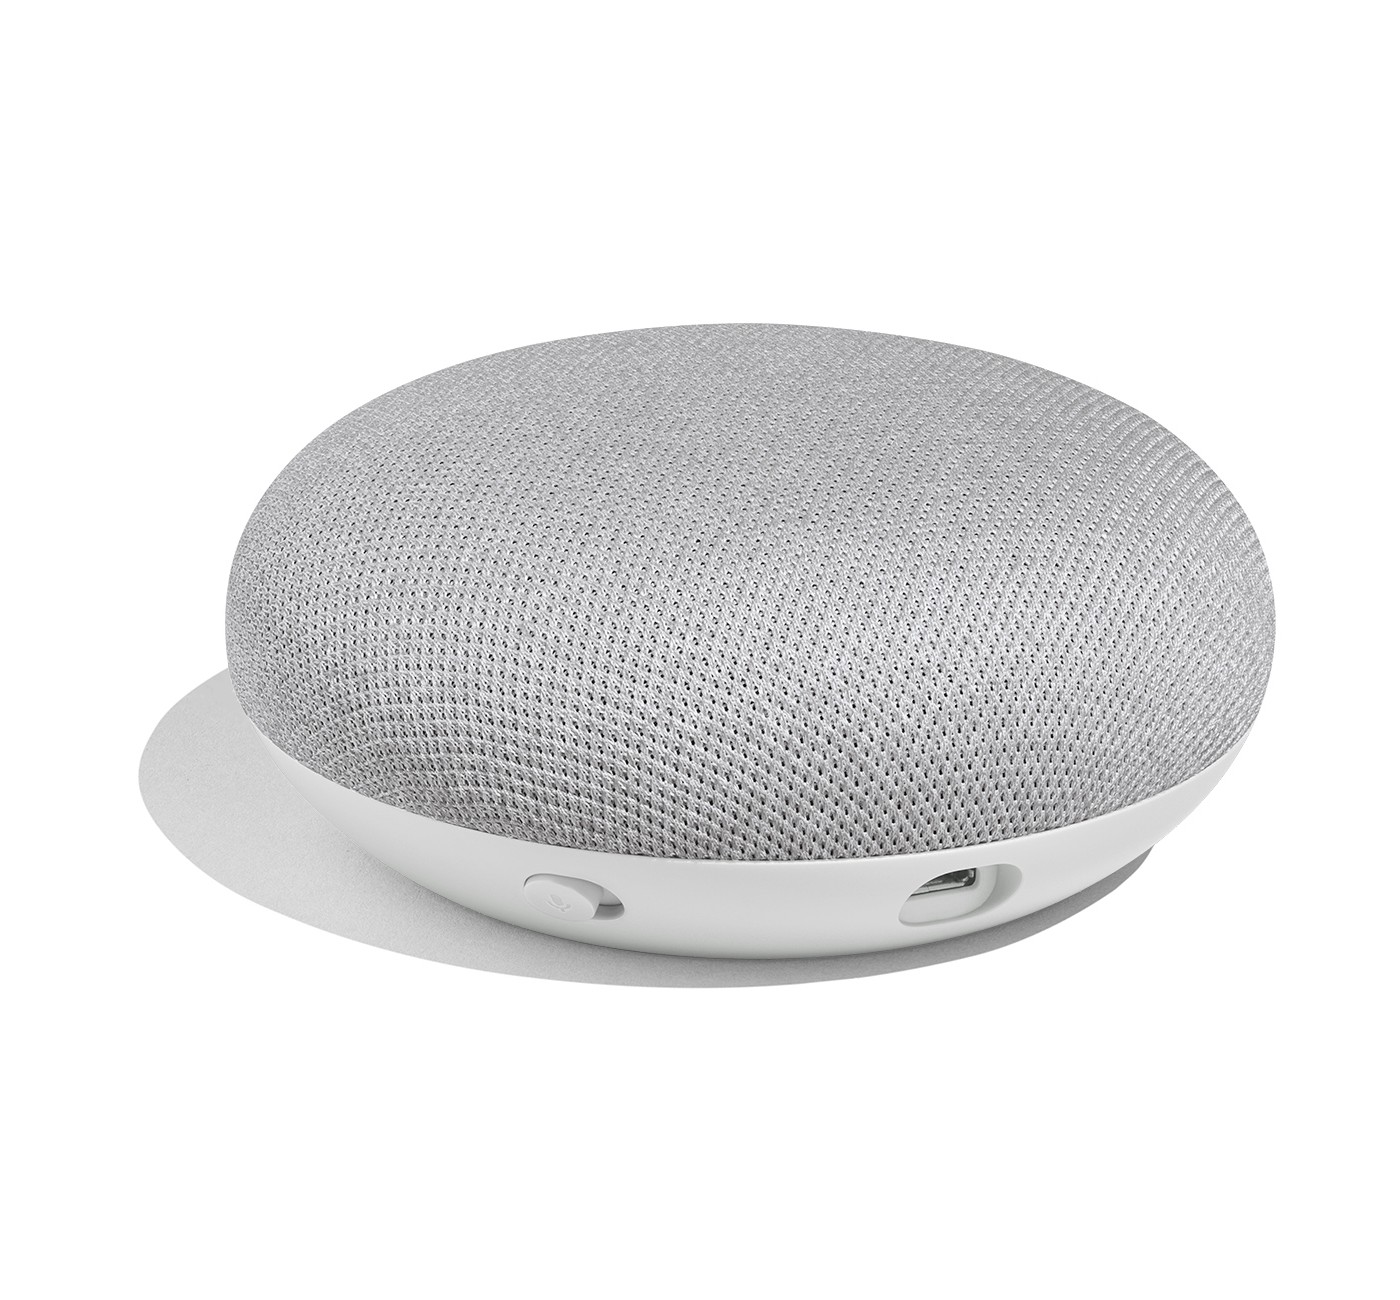 how-to-enable-voice-recognition-on-google-home-mini